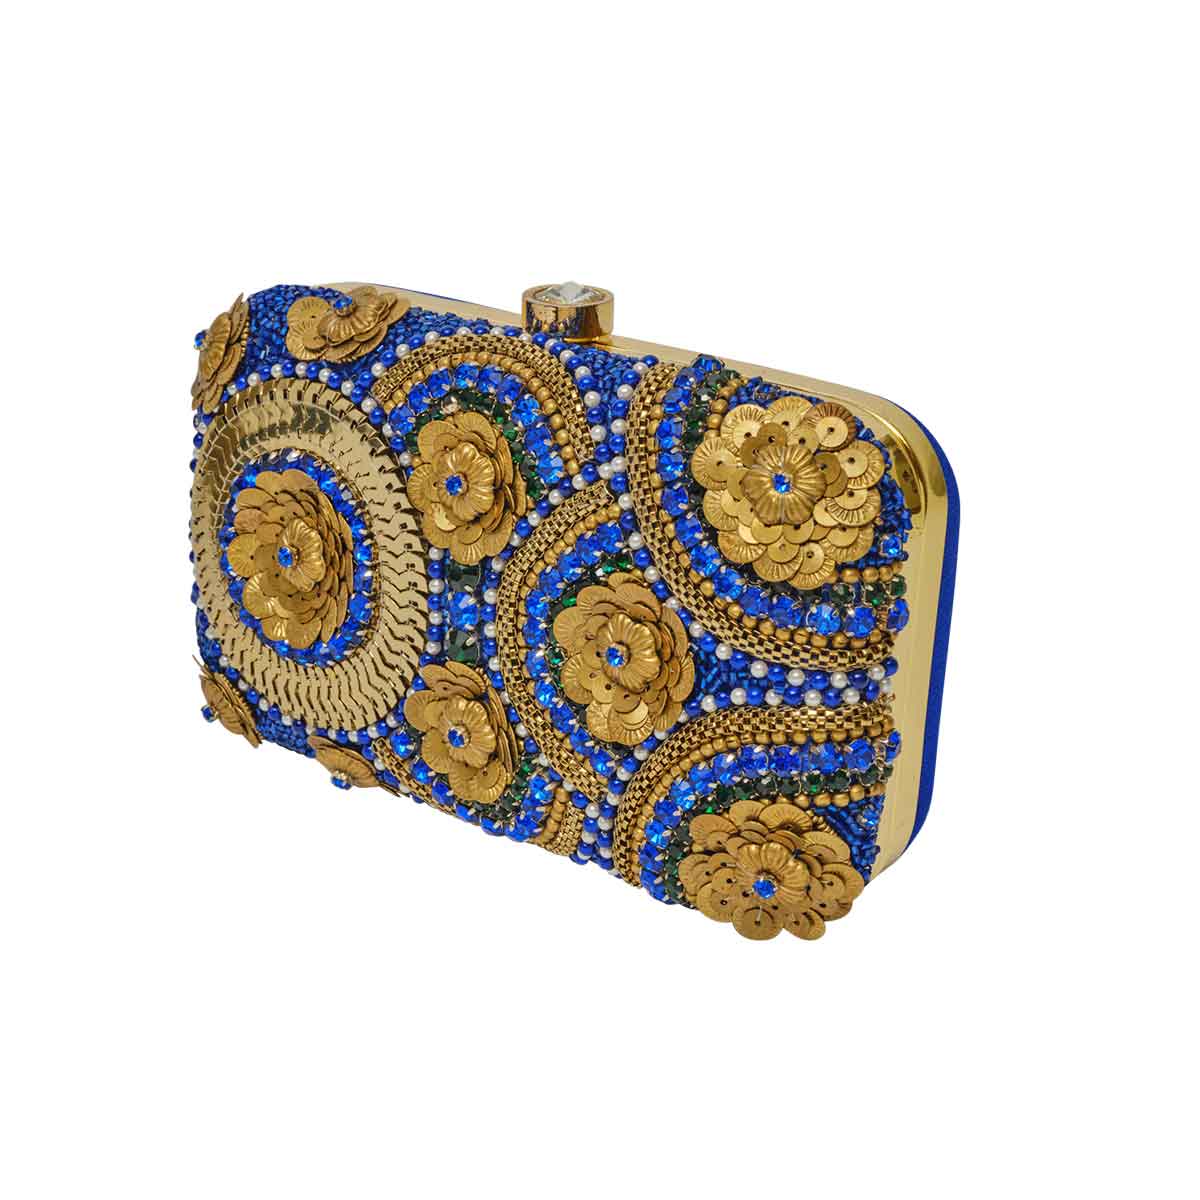 side view of Blue and gold clutch handbag, with big stone lock. Aelia Clutch from Rani Collection by Veronica Tharmalingam